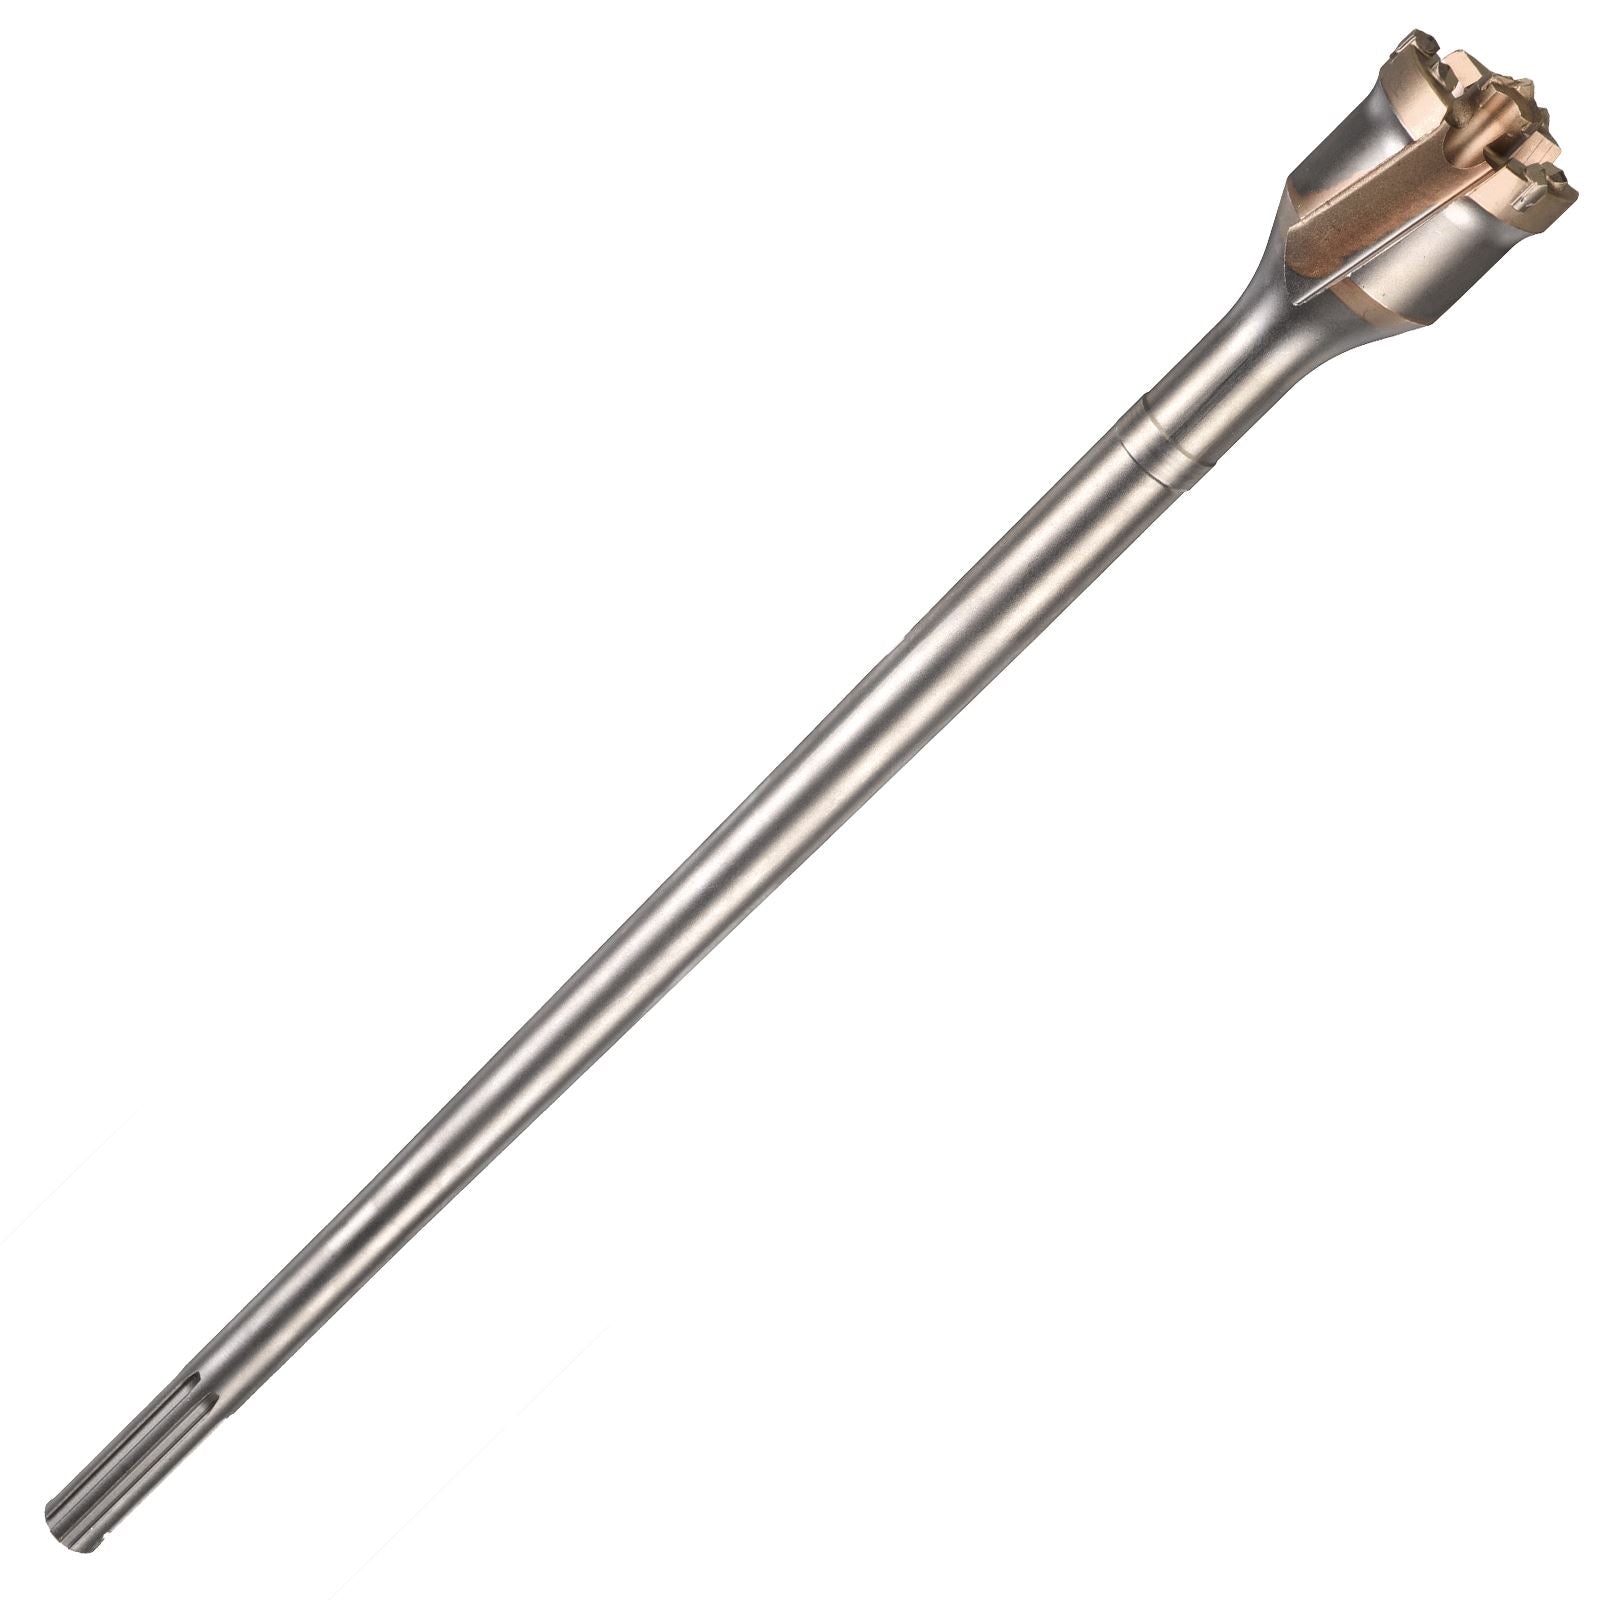 Milwaukee SDS Max TCT Tunnel Drill Bits 40-80mm 550-990mm Length for Reinforced Concrete